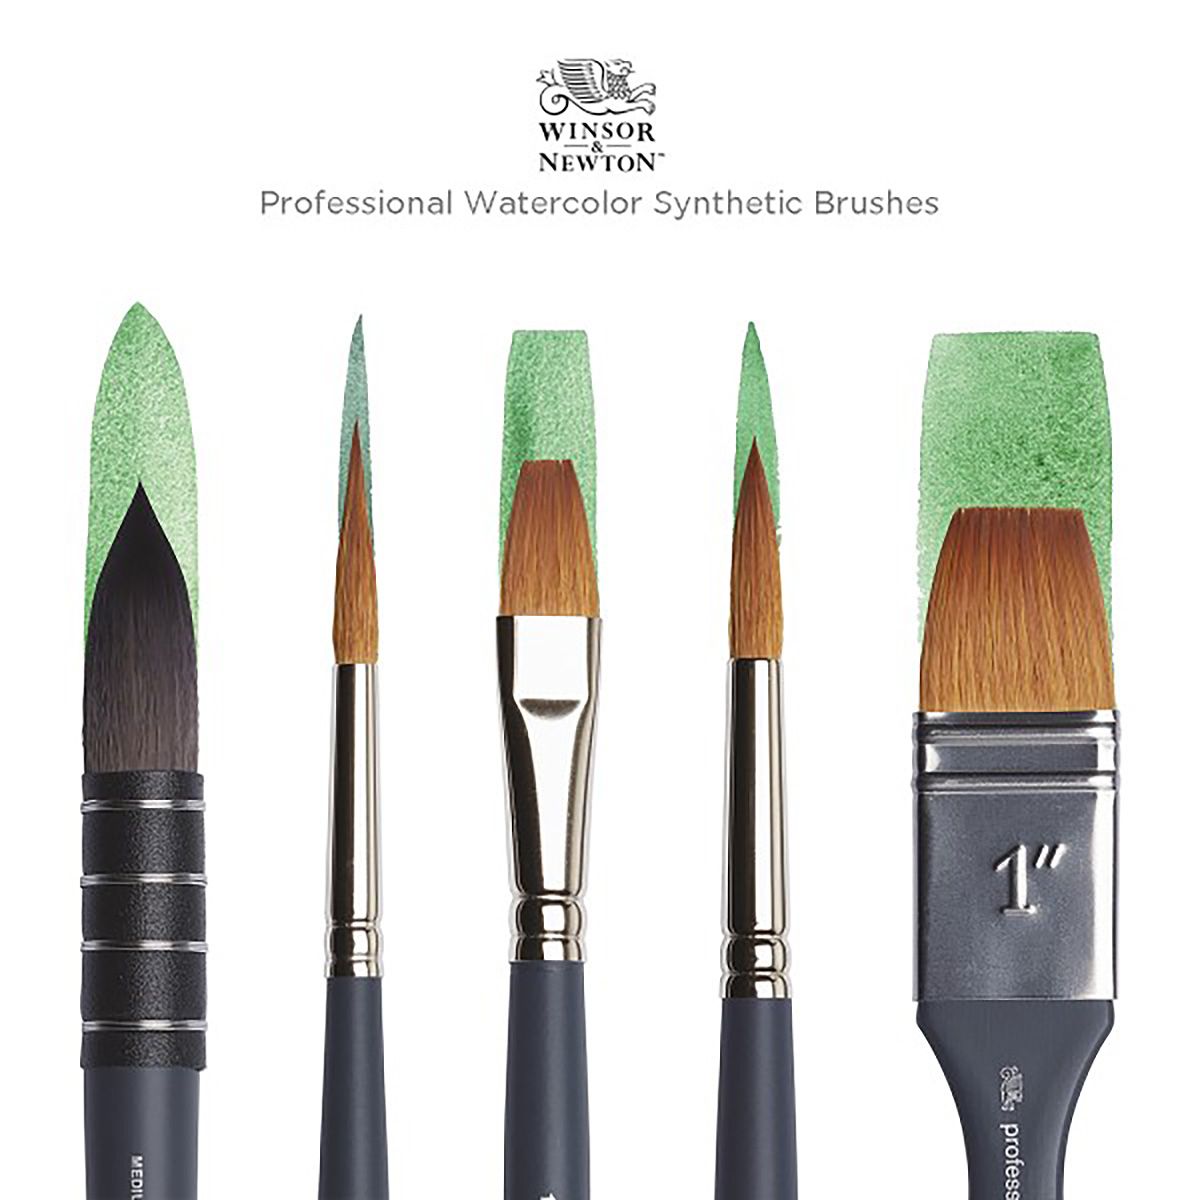 Winsor & Newton's Professional Synthetic Brushes - The Art Dog Blog